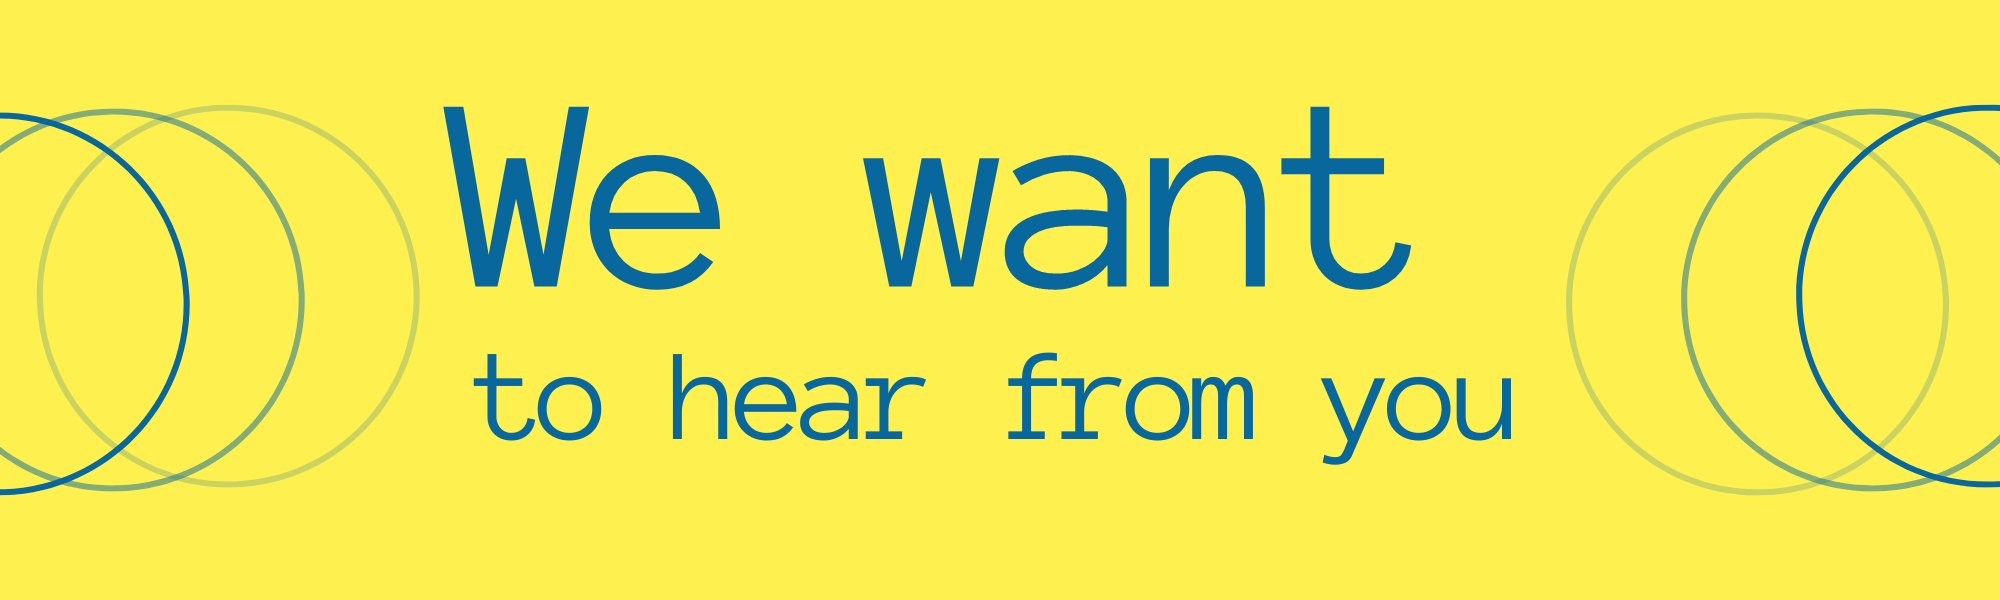 A decorative yellow banner asking for feedback